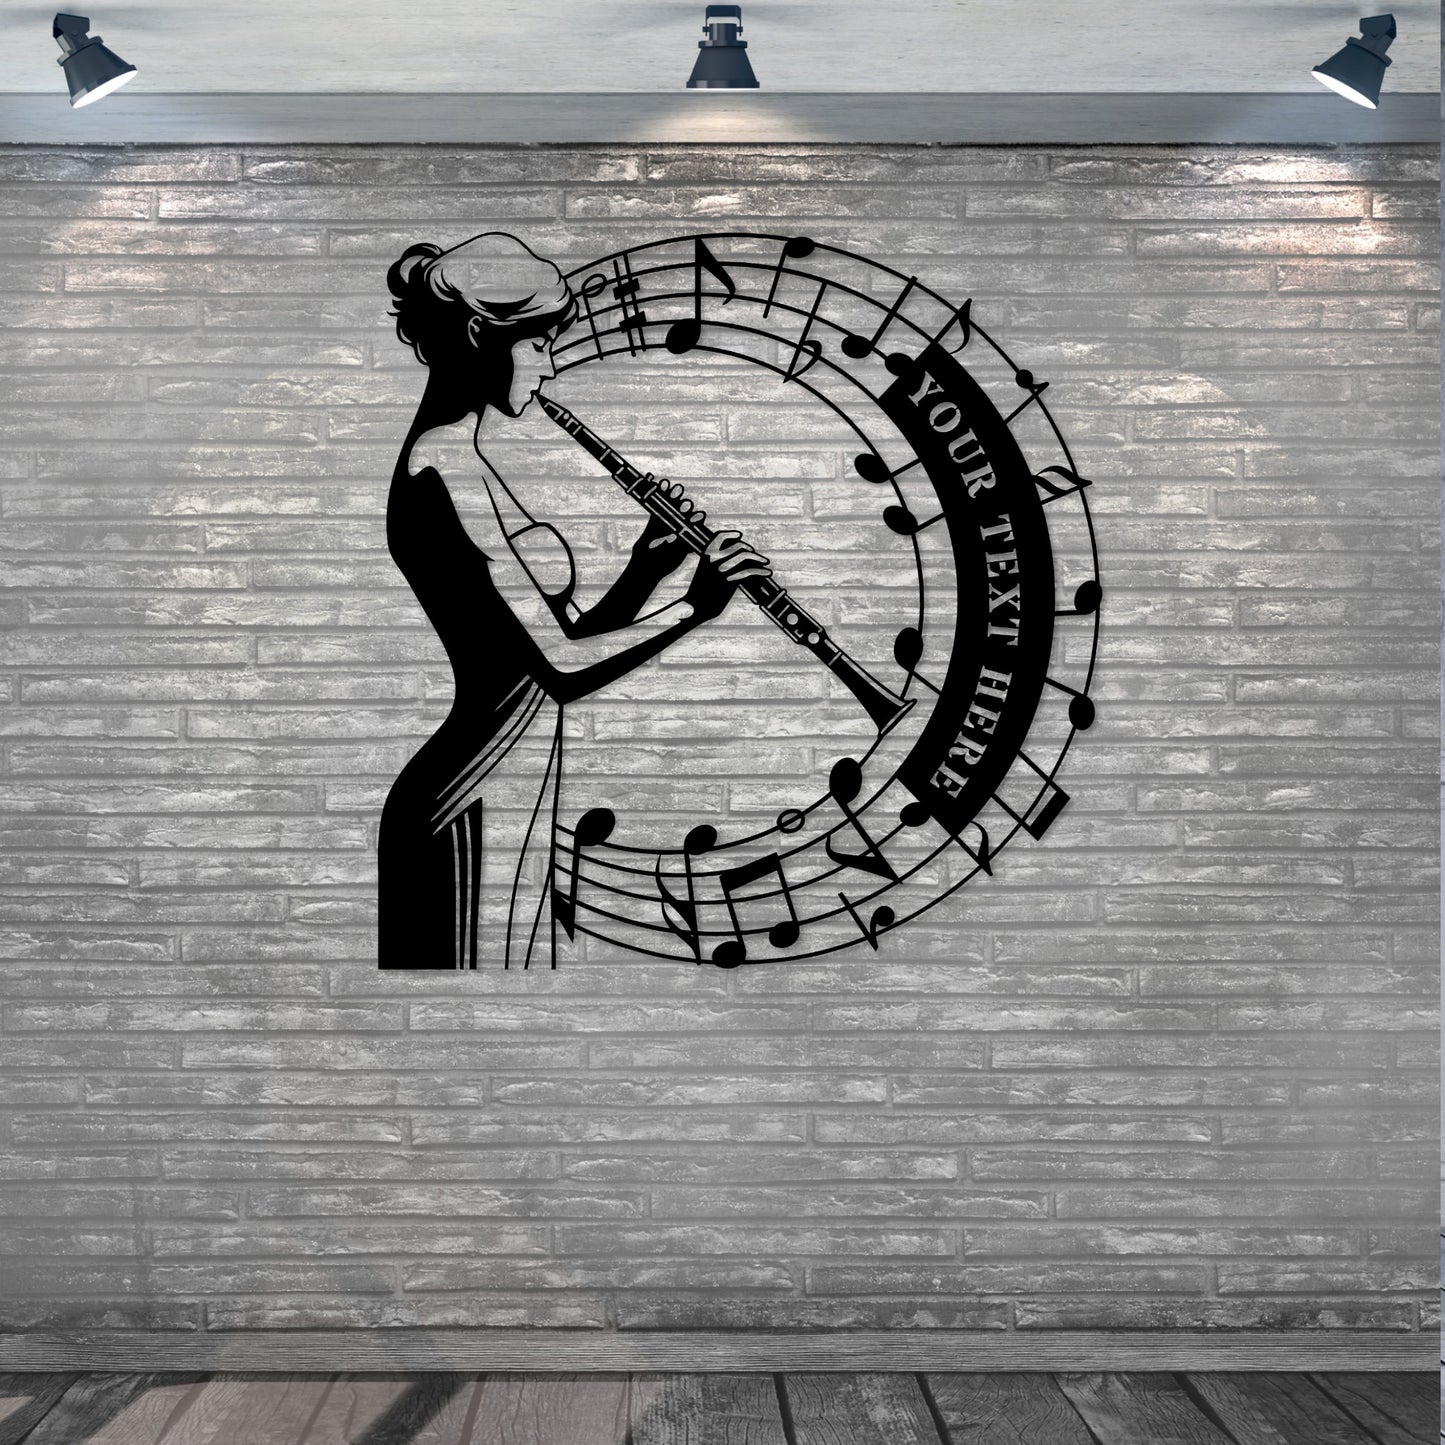 Personalized Female Clarinet Player Name Metal Sign. Custom Musician Wall Decor Gift. Female Jazz Player Wall Hanging. Music Room Decor Gift